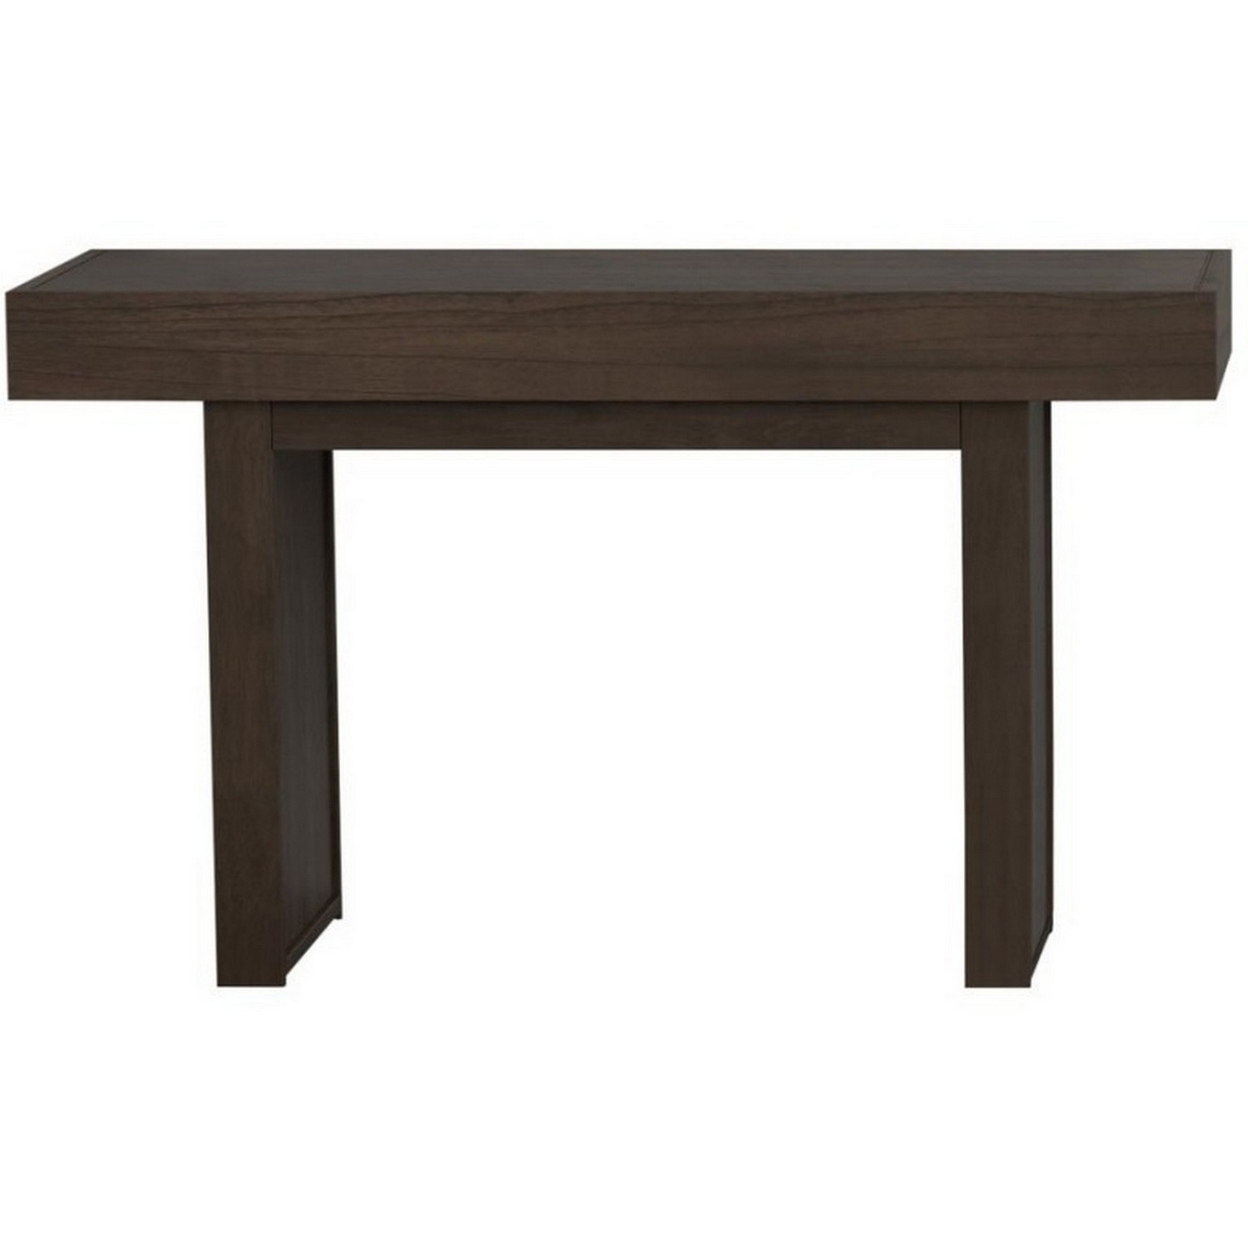 Rectangular Wooden Top Sofa Table With Side Panel Support, Taupe Gray- Saltoro Sherpi